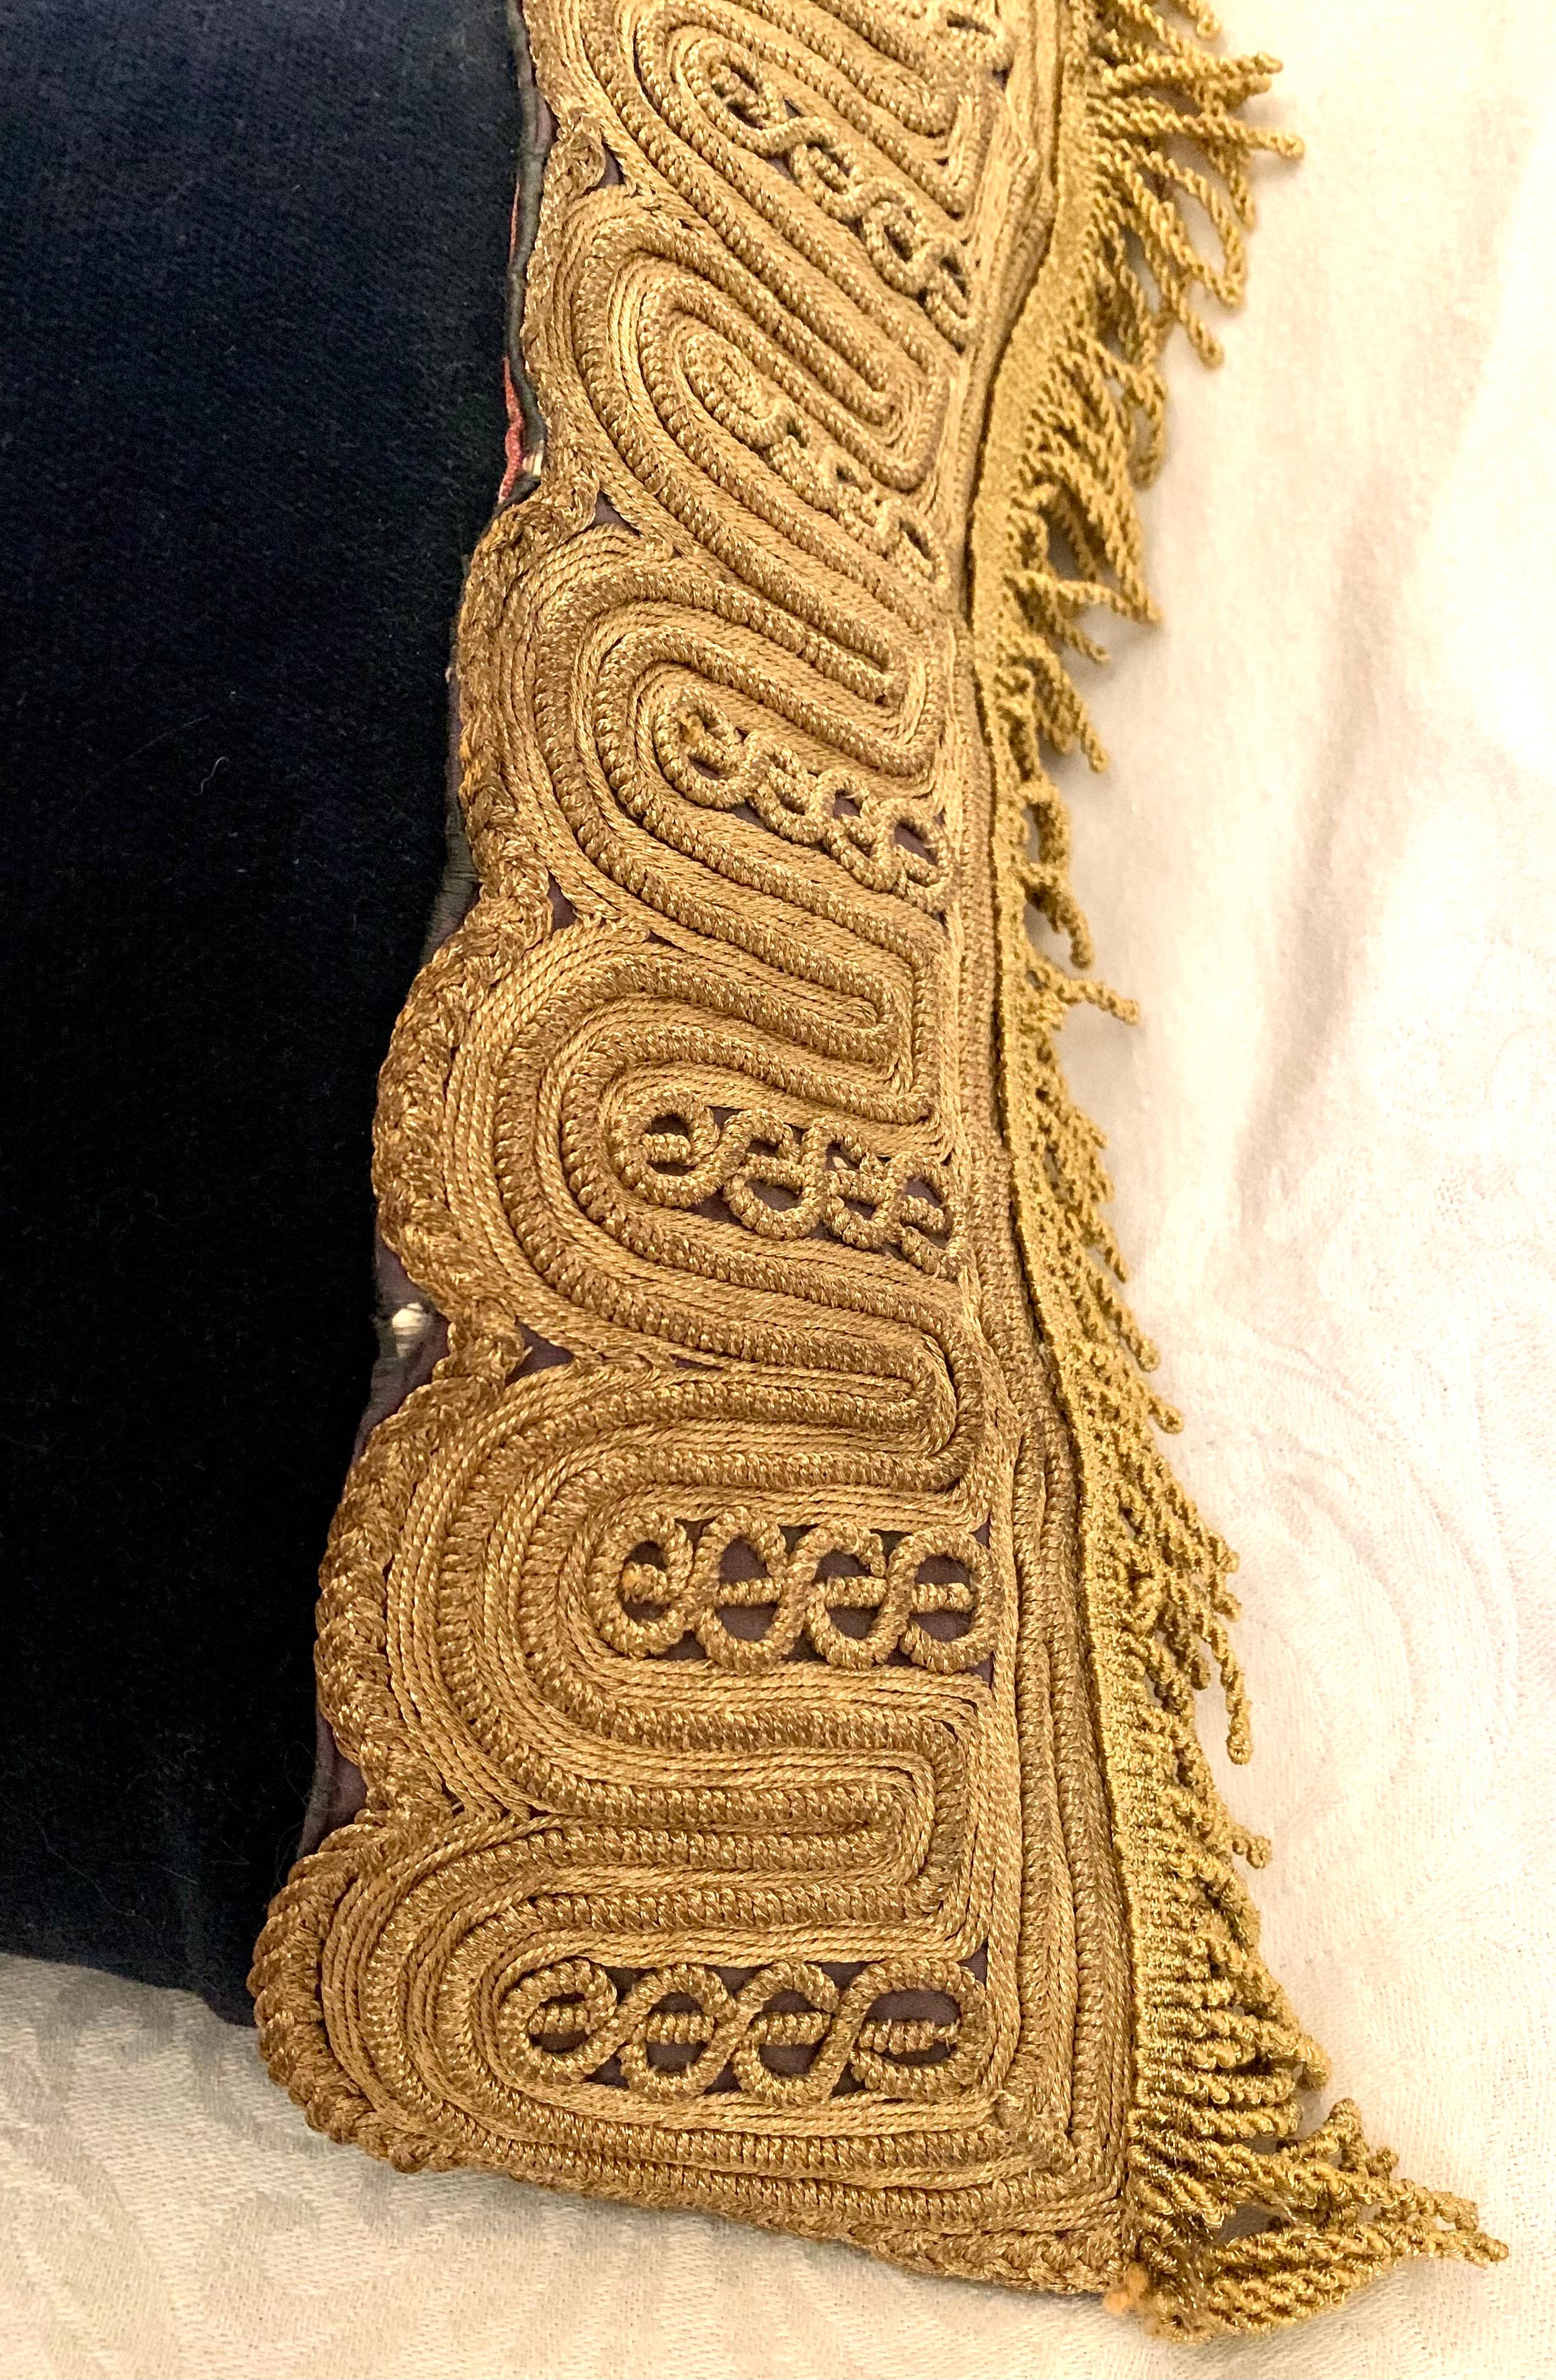 Hand-Crafted Exquisite Antique Metallic Gold Thread Hand Embroidered Blue Velvet Pillow For Sale